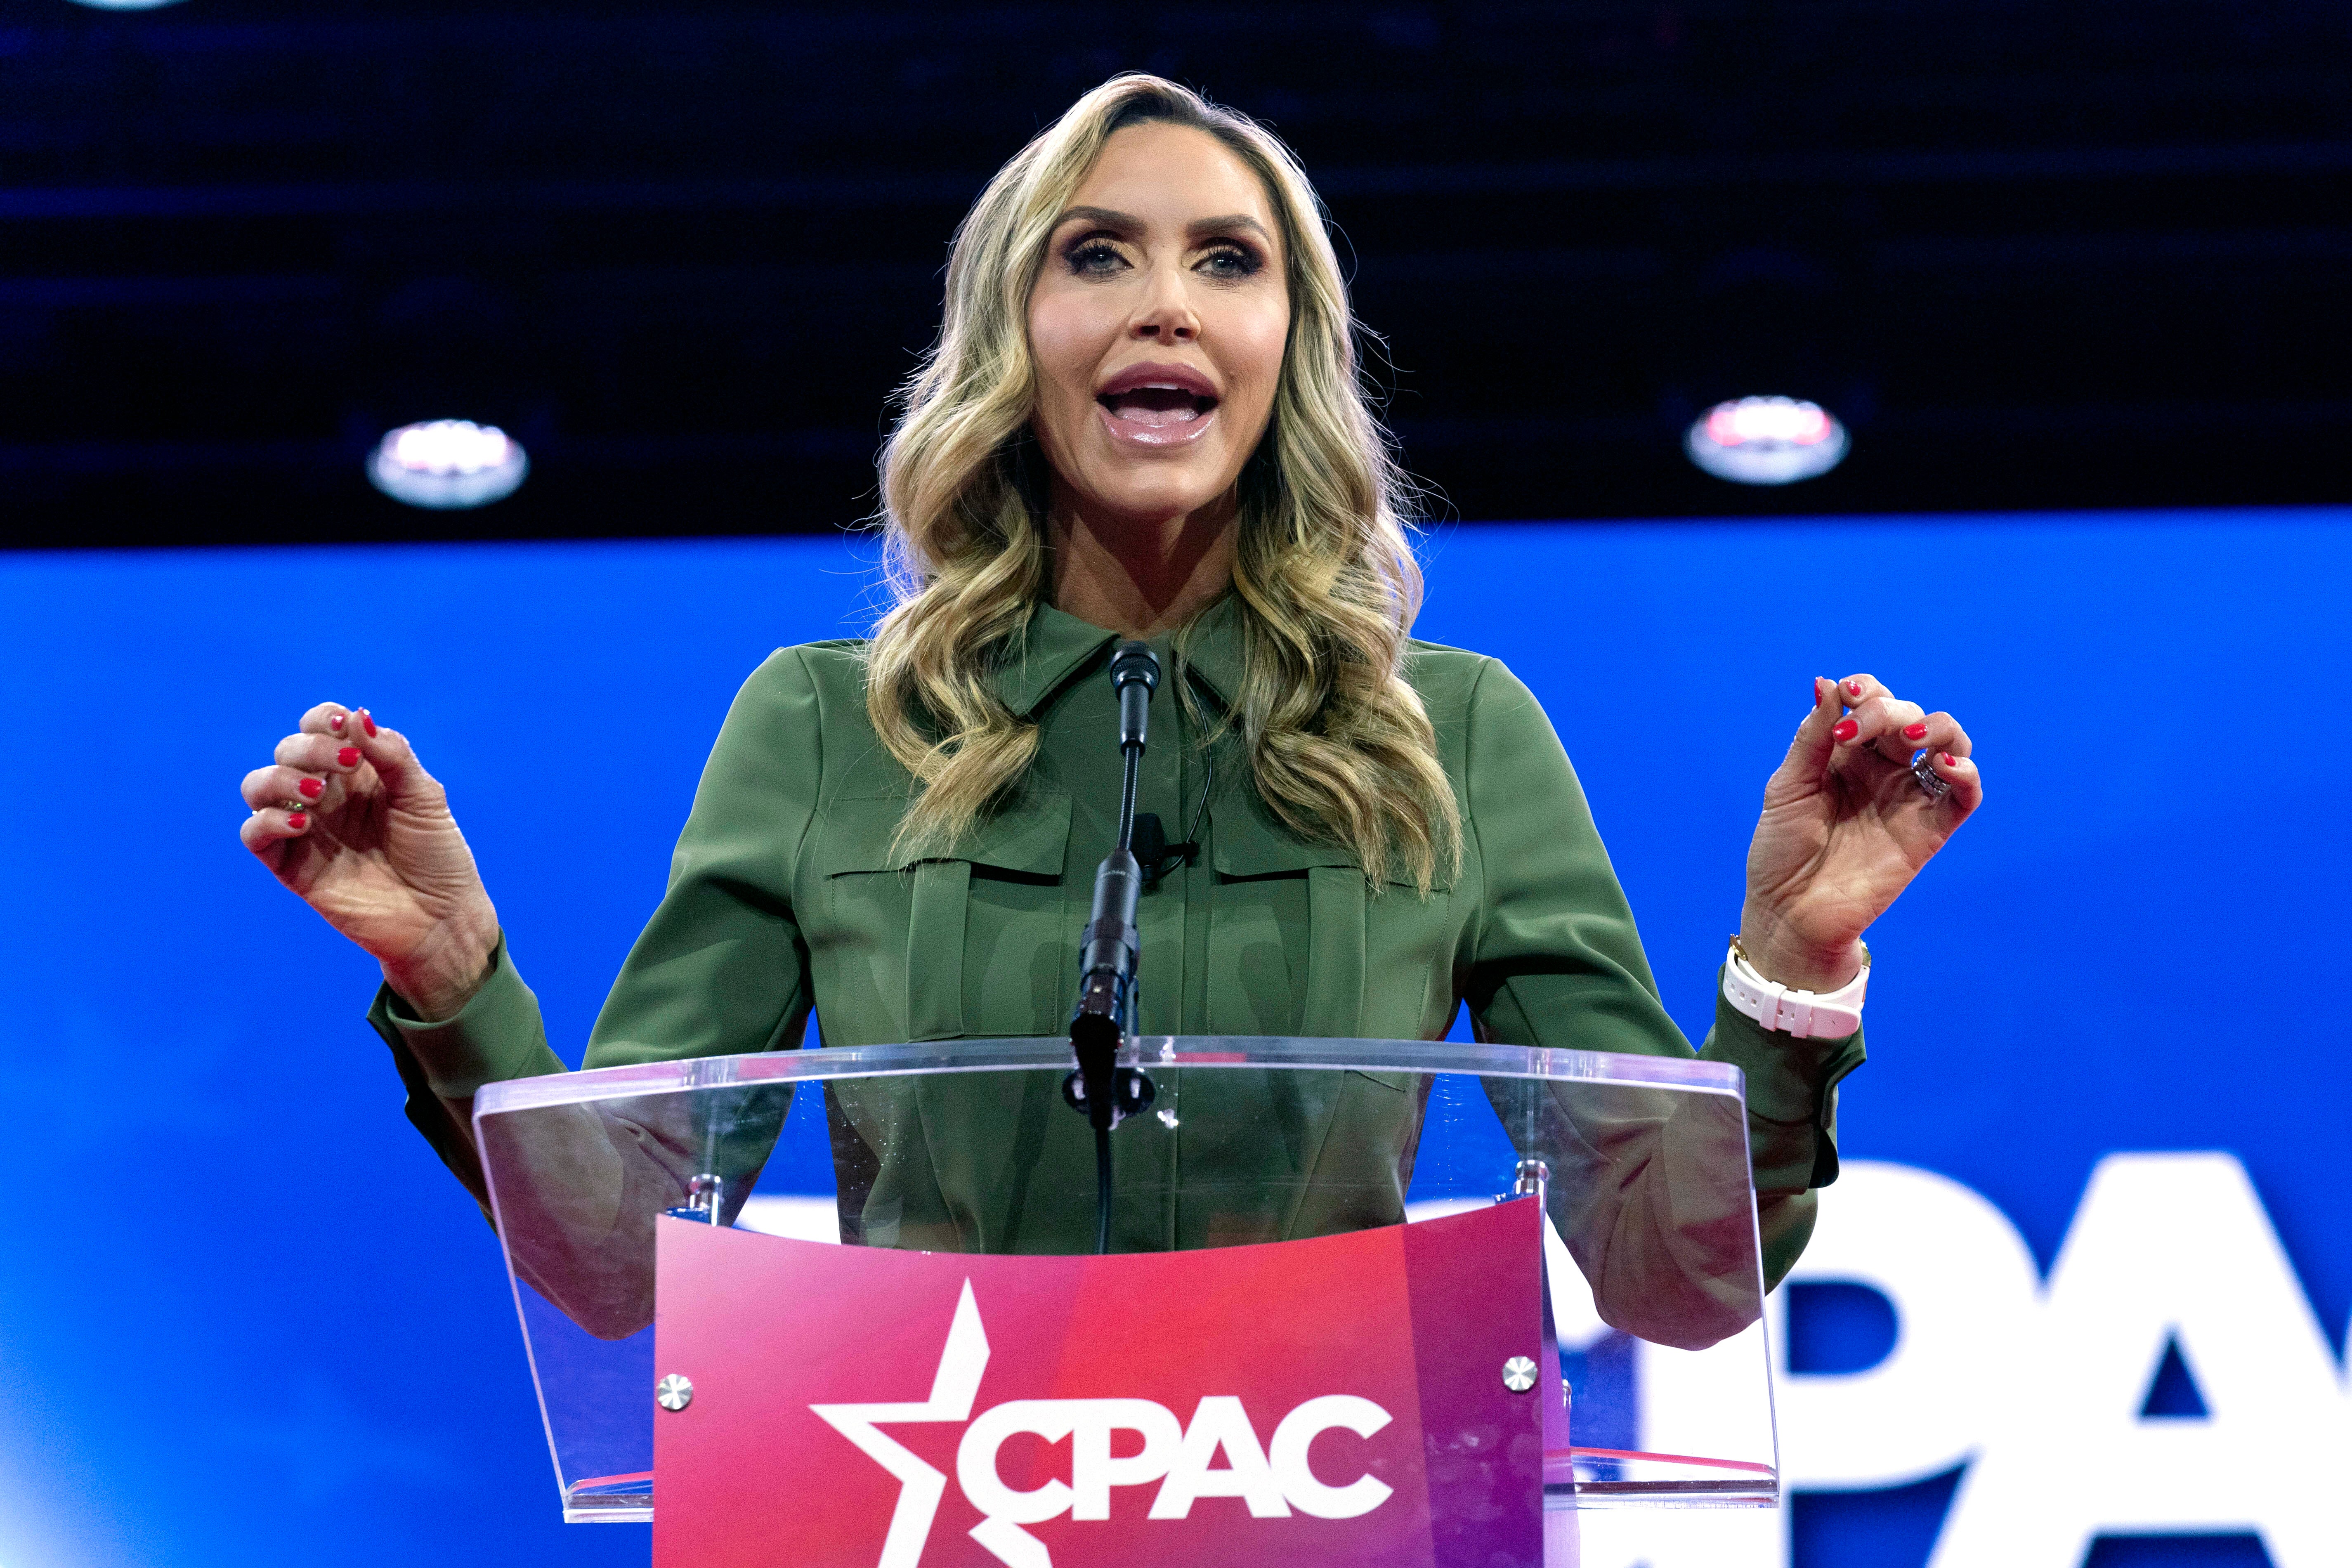 Lara Trump spoke at CPAC this week sayhing she wants her son to know “its okay to be a patriot”